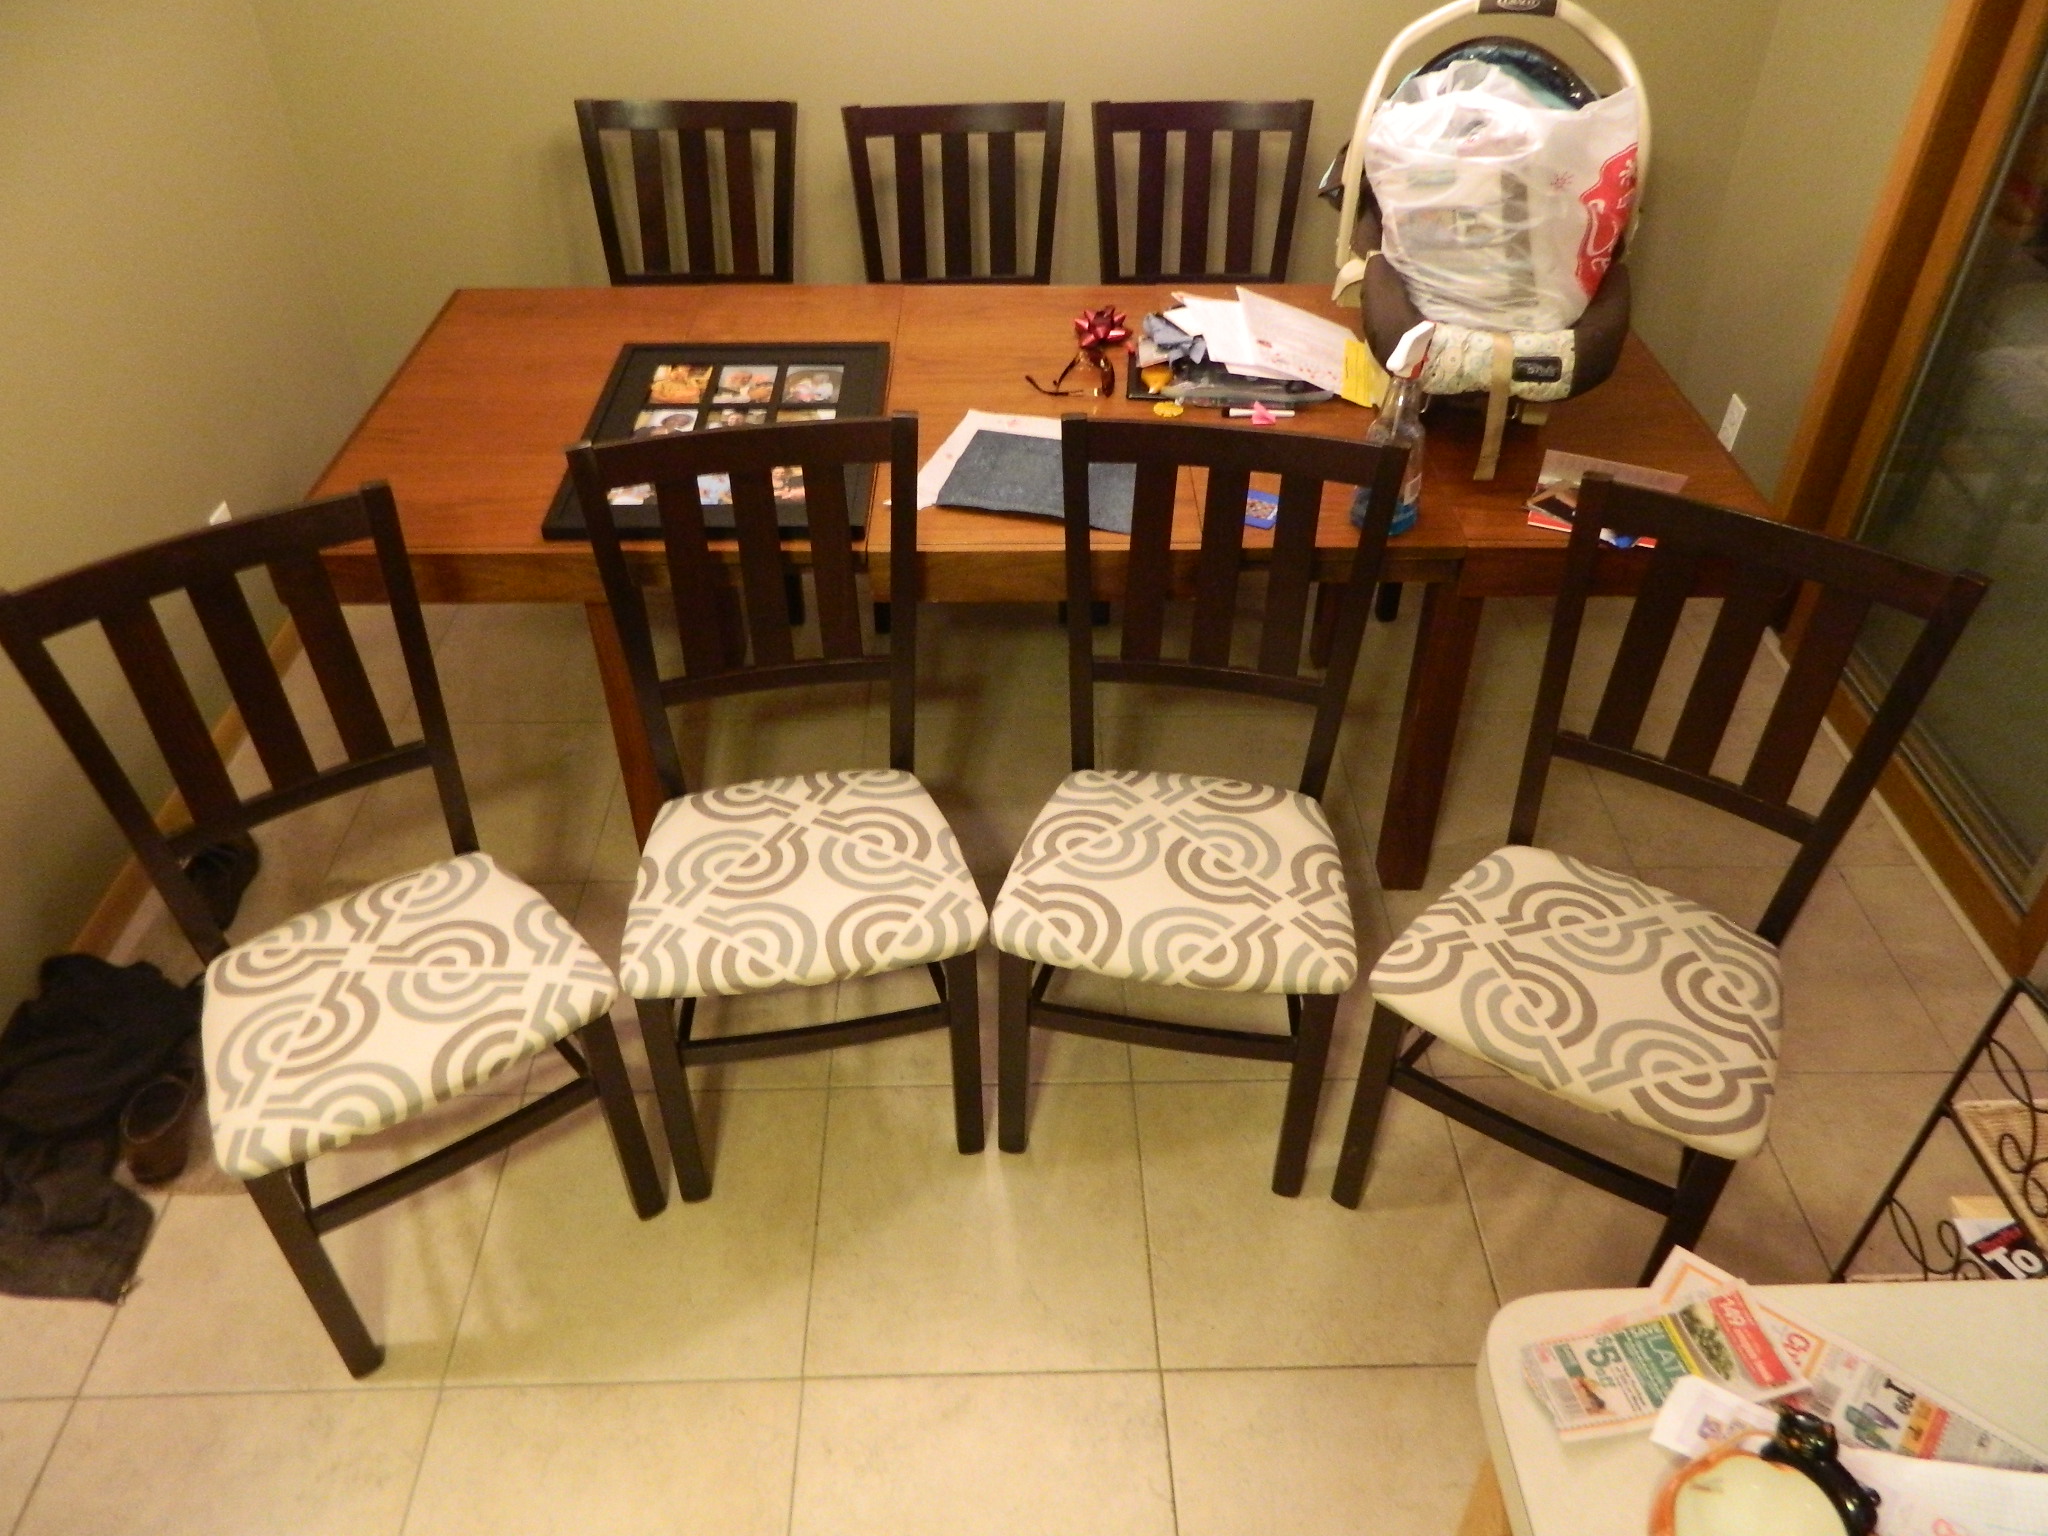 Reupholstering Dining Room Chairs | ThriftyFun